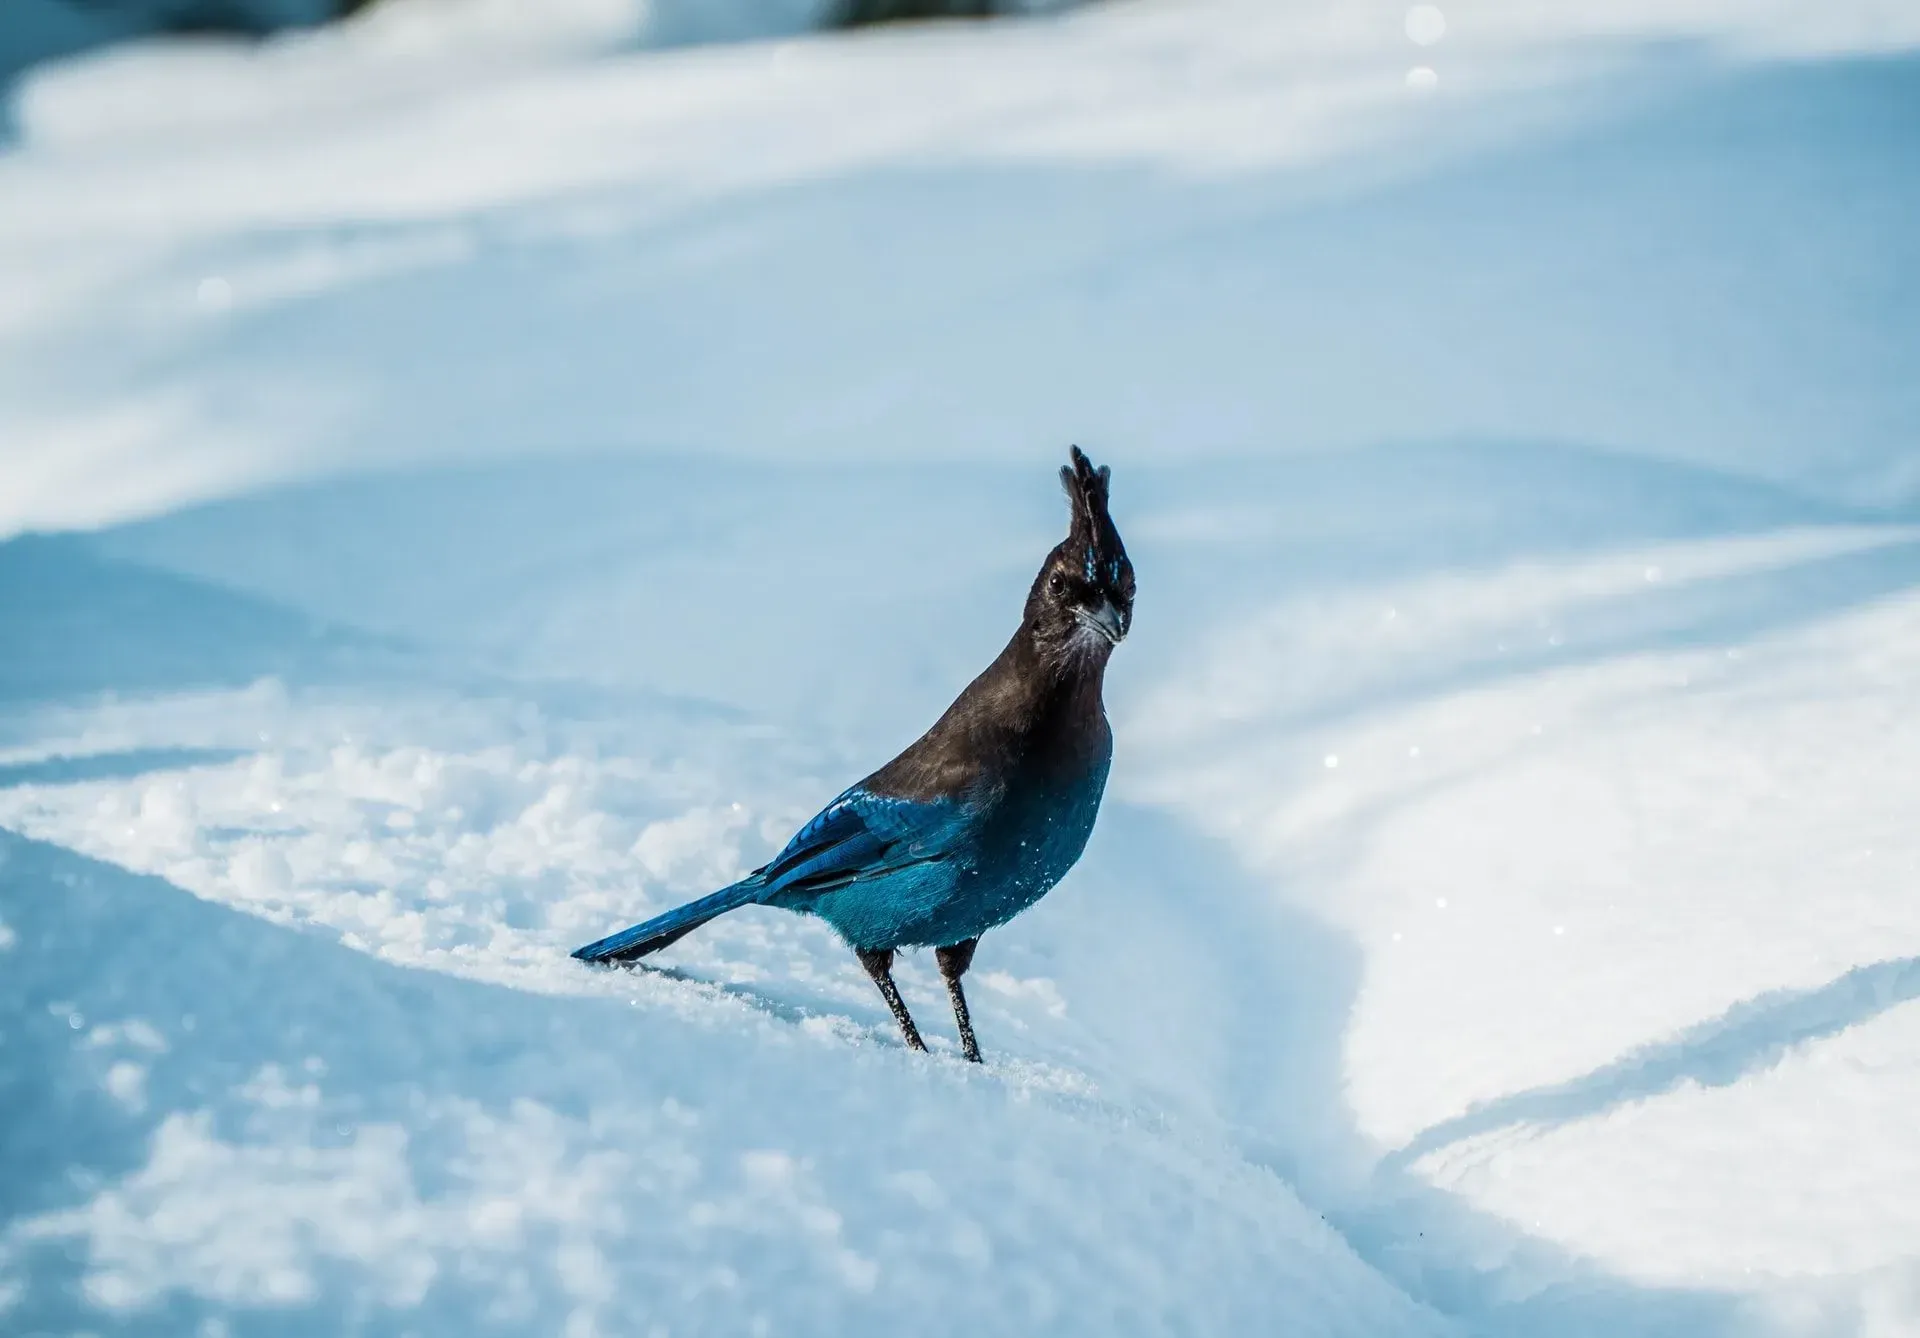 A blue and black-colored stellar's Jay on a snow-covered surface.